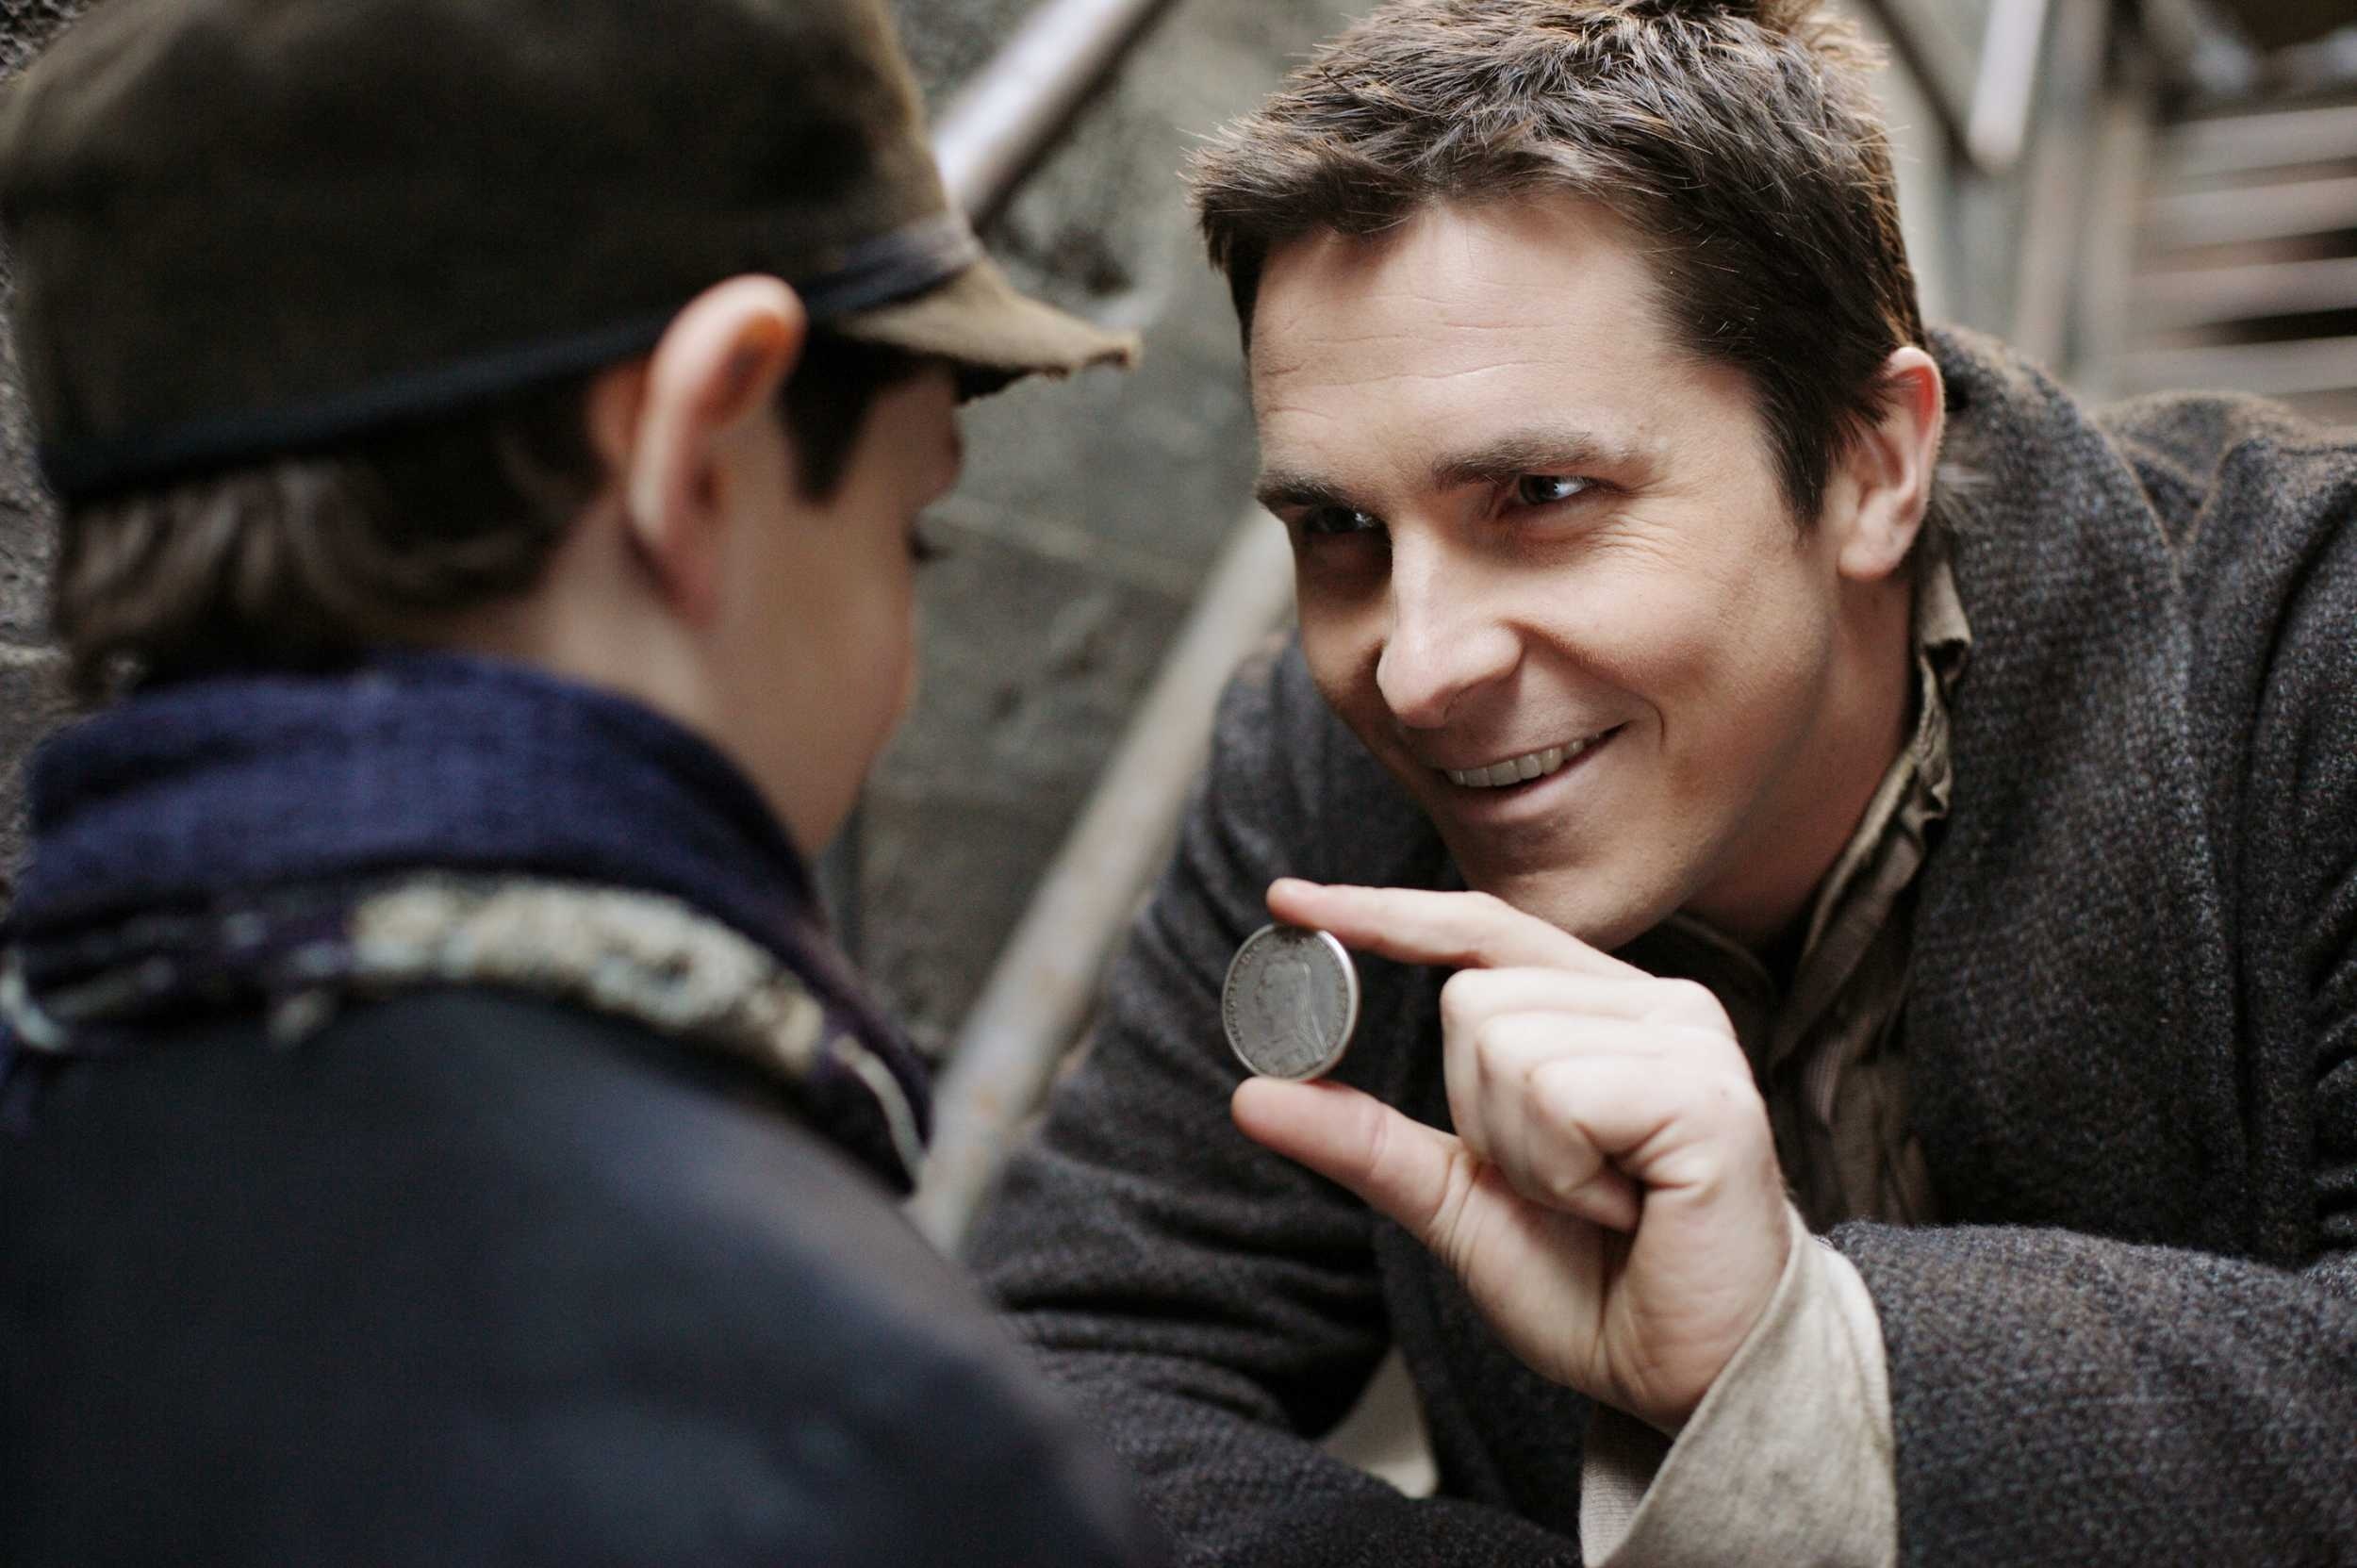 <p>The first line of <em>The Prestige</em> is almost a call to action. “Are you watching closely?” says Christian Bale’s character. He’s not talking to us, the audience, but in a way, he could be. In a way, he’s speaking for director Christopher Nolan. <em>The Prestige</em> is about magicians, revenge, and obsession. It’s also about things not being what they seem. Better watch closely.</p><p><a href='https://www.msn.com/en-us/community/channel/vid-cj9pqbr0vn9in2b6ddcd8sfgpfq6x6utp44fssrv6mc2gtybw0us'>Follow us on MSN to see more of our exclusive entertainment content.</a></p>